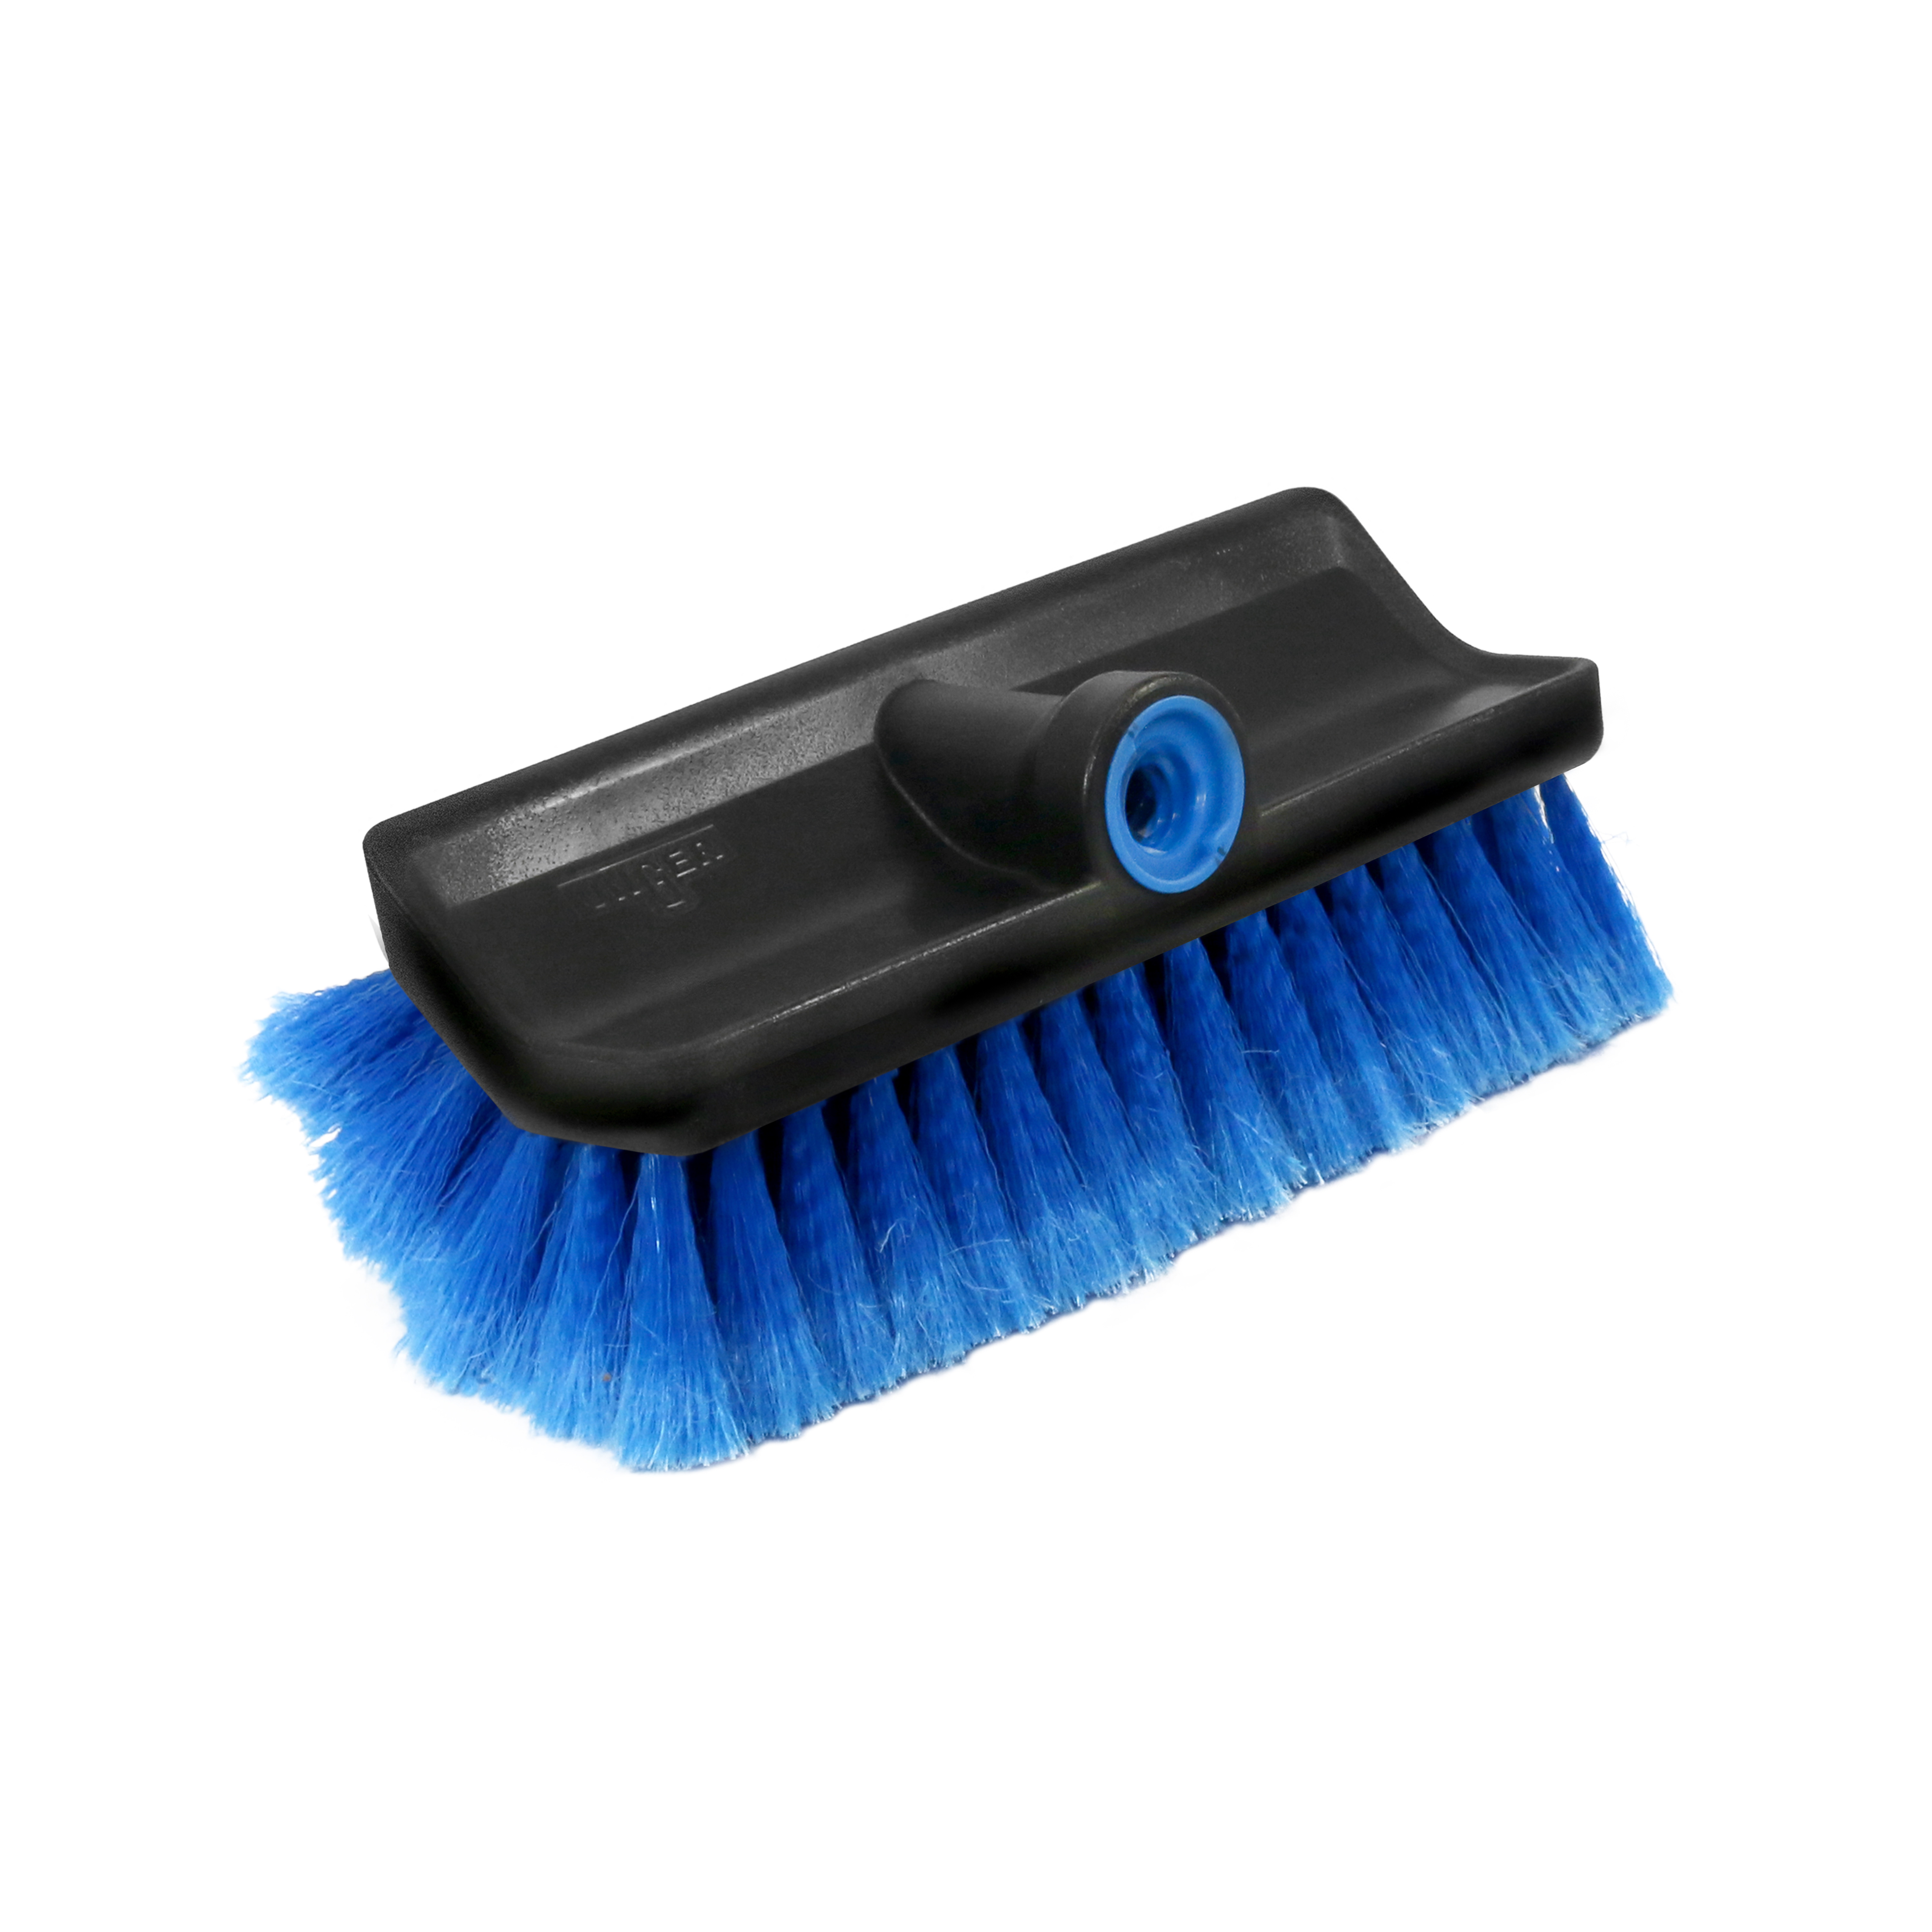 975820 Multi-Angle Wash Brush, 10 in W Brush, Plastic, Does not include Plastic Handle